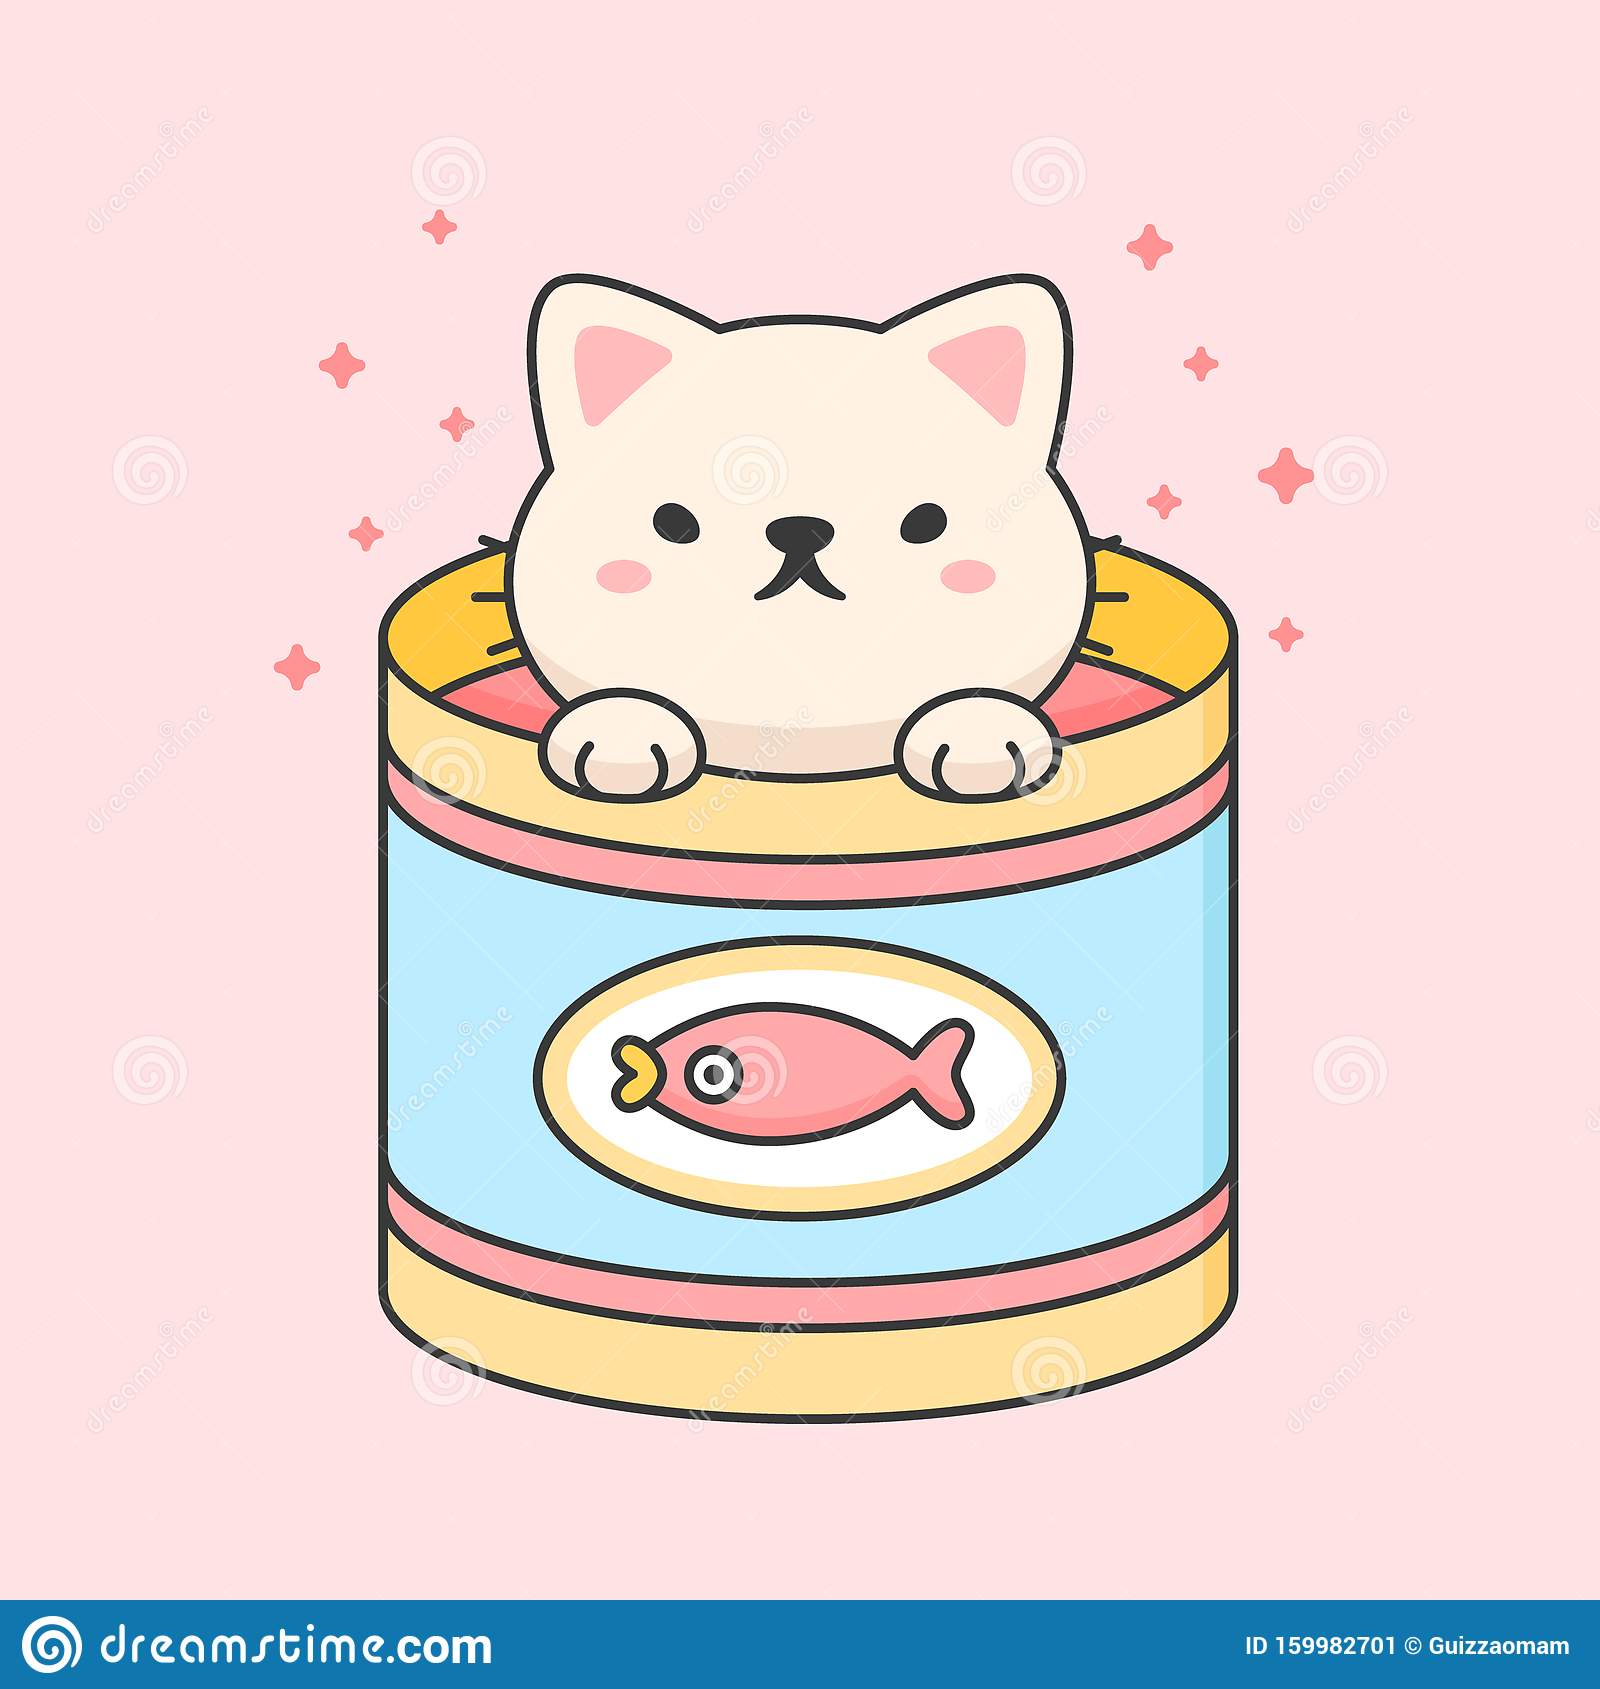 Cute cat in a tuna can stock illustration. Illustration of